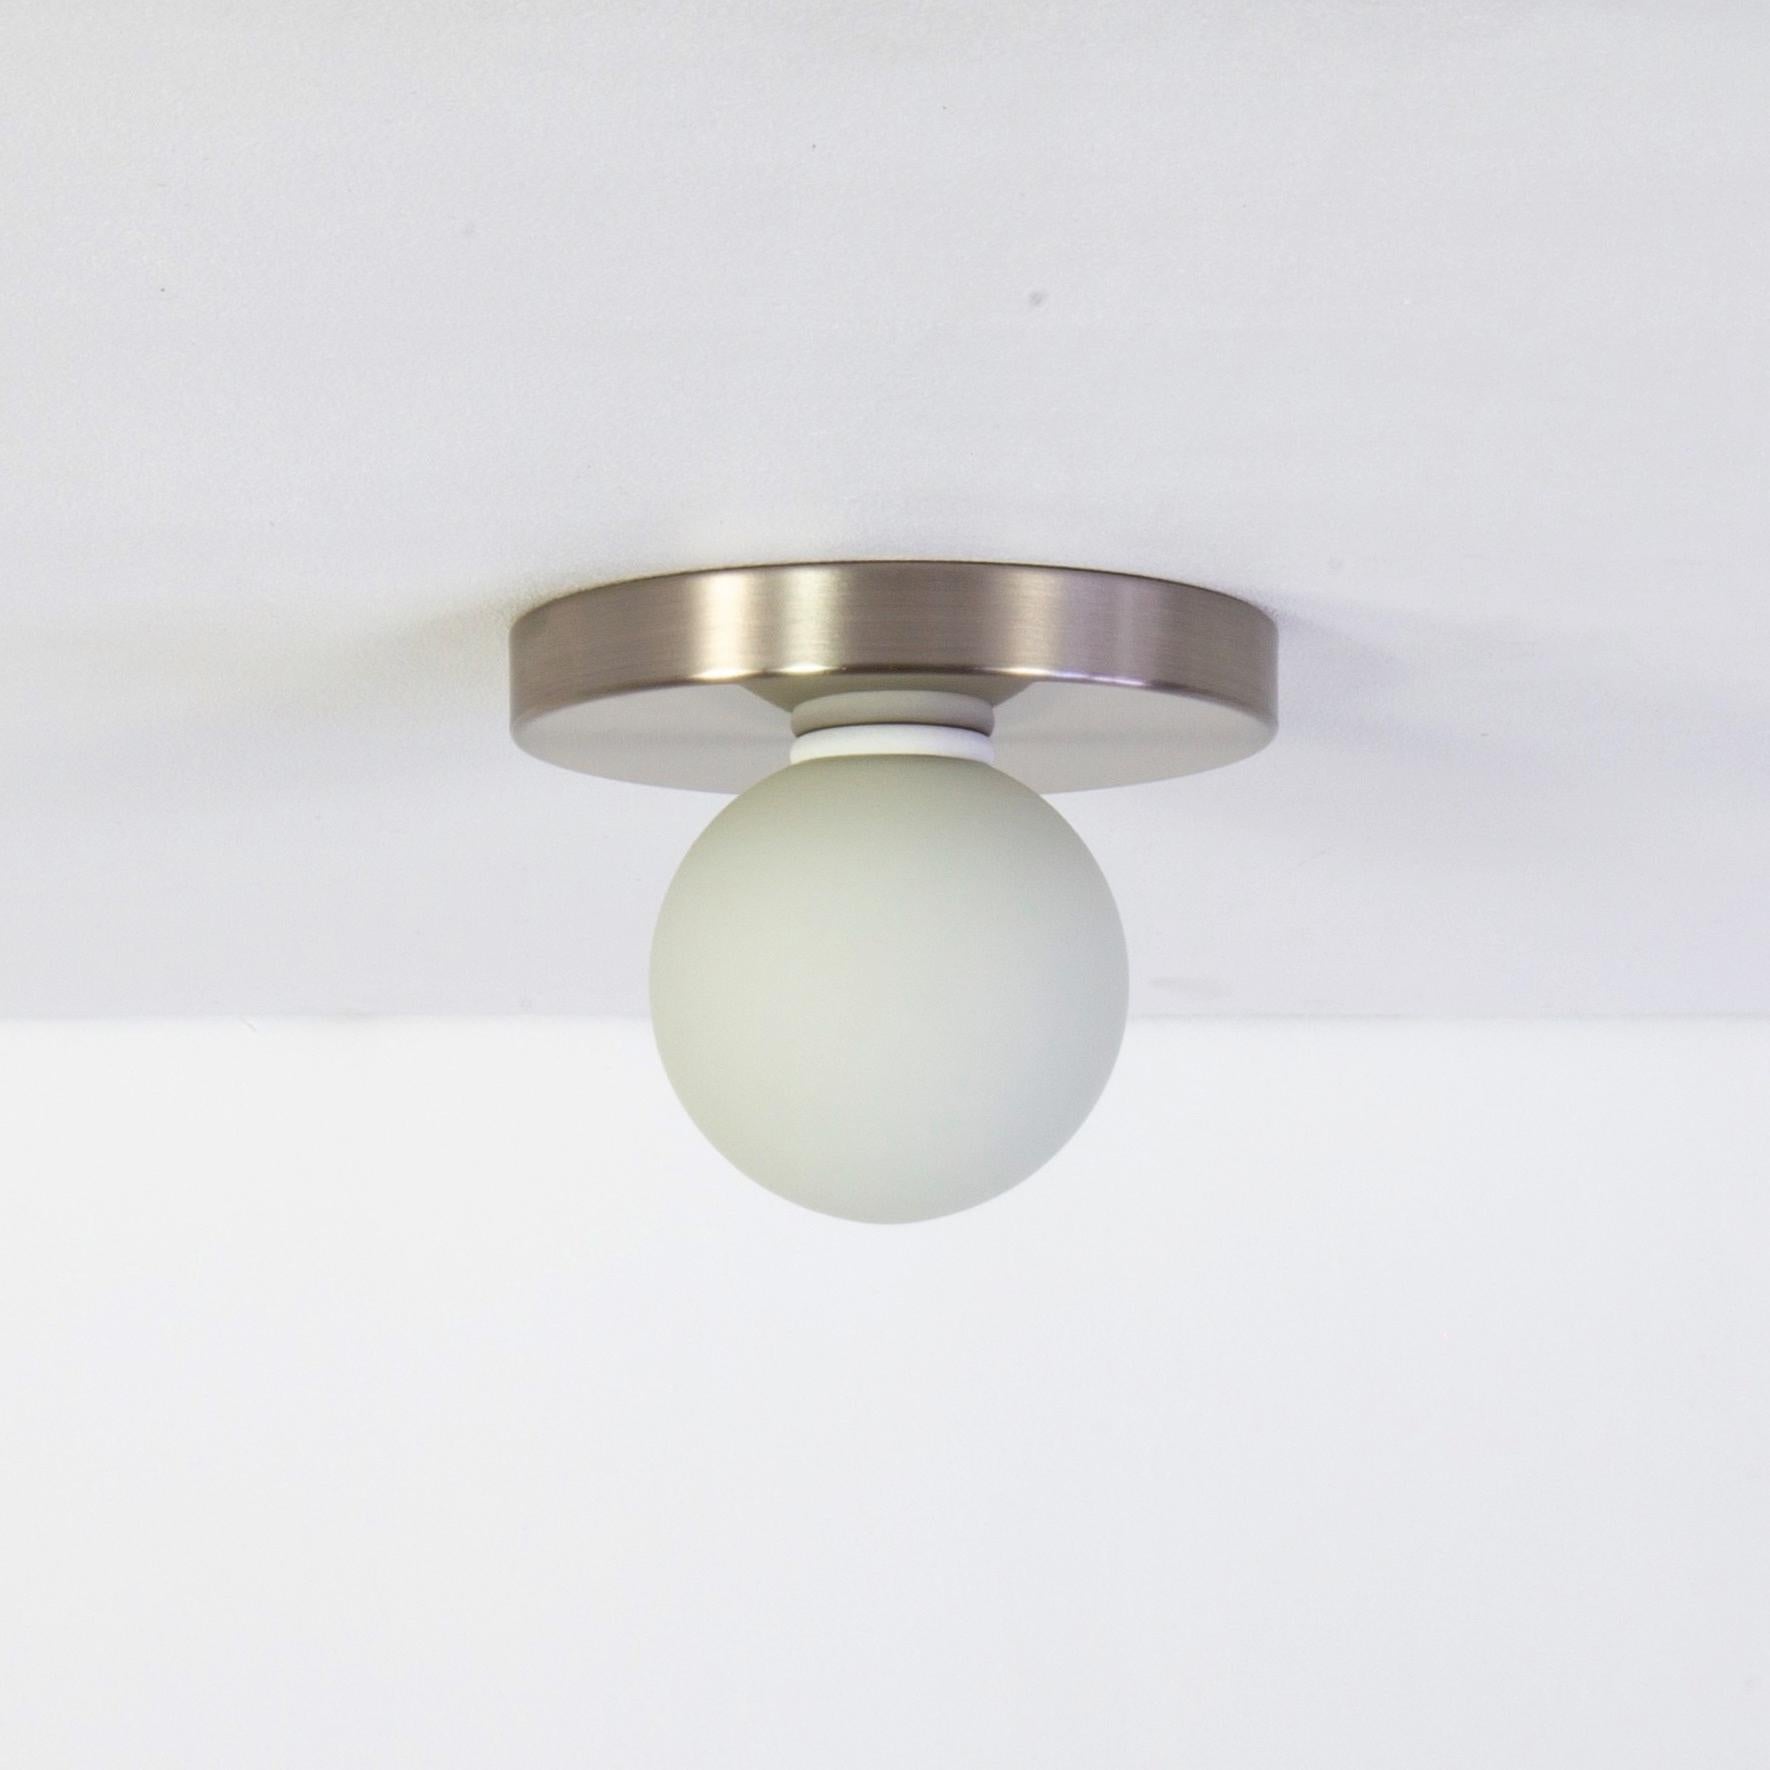 This listing is for 2x Globe Flush Mounts in brushed nickel designed and manufactured by Research.Lighting.

Materials: Brass, Steel & Glass
Finish: Brushed Nickel
Electronics: 1x G9 Socket, 1x 4.5 Watt LED Bulb (included), 450 Lumens
ADA Compliant.